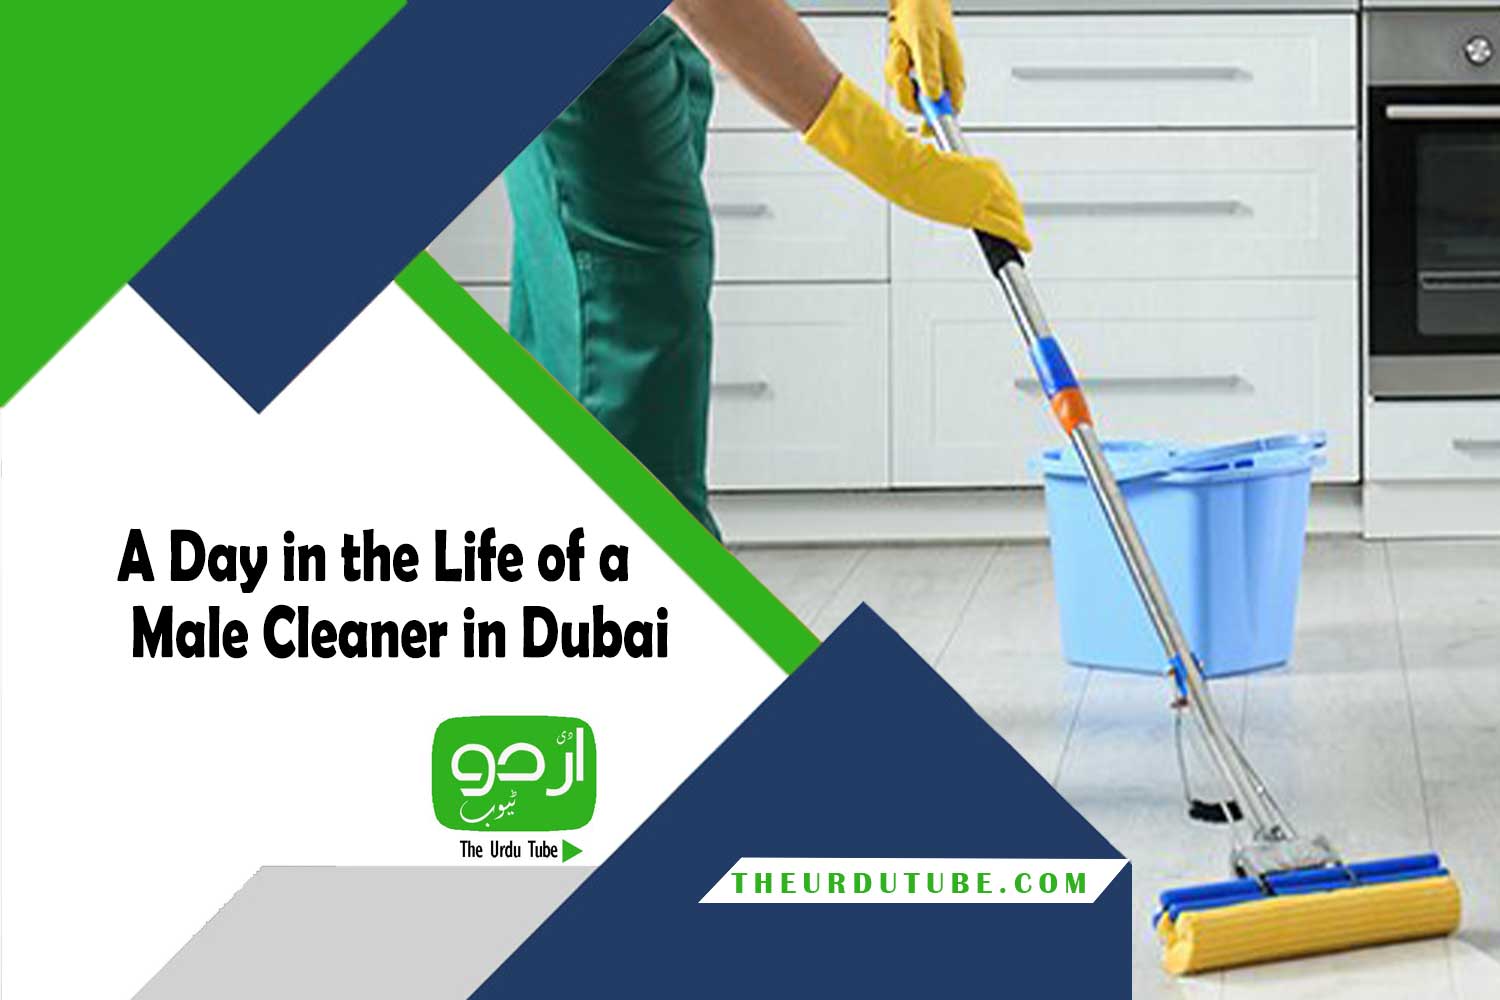 A Day in the Life of a Male Cleaner in Dubai